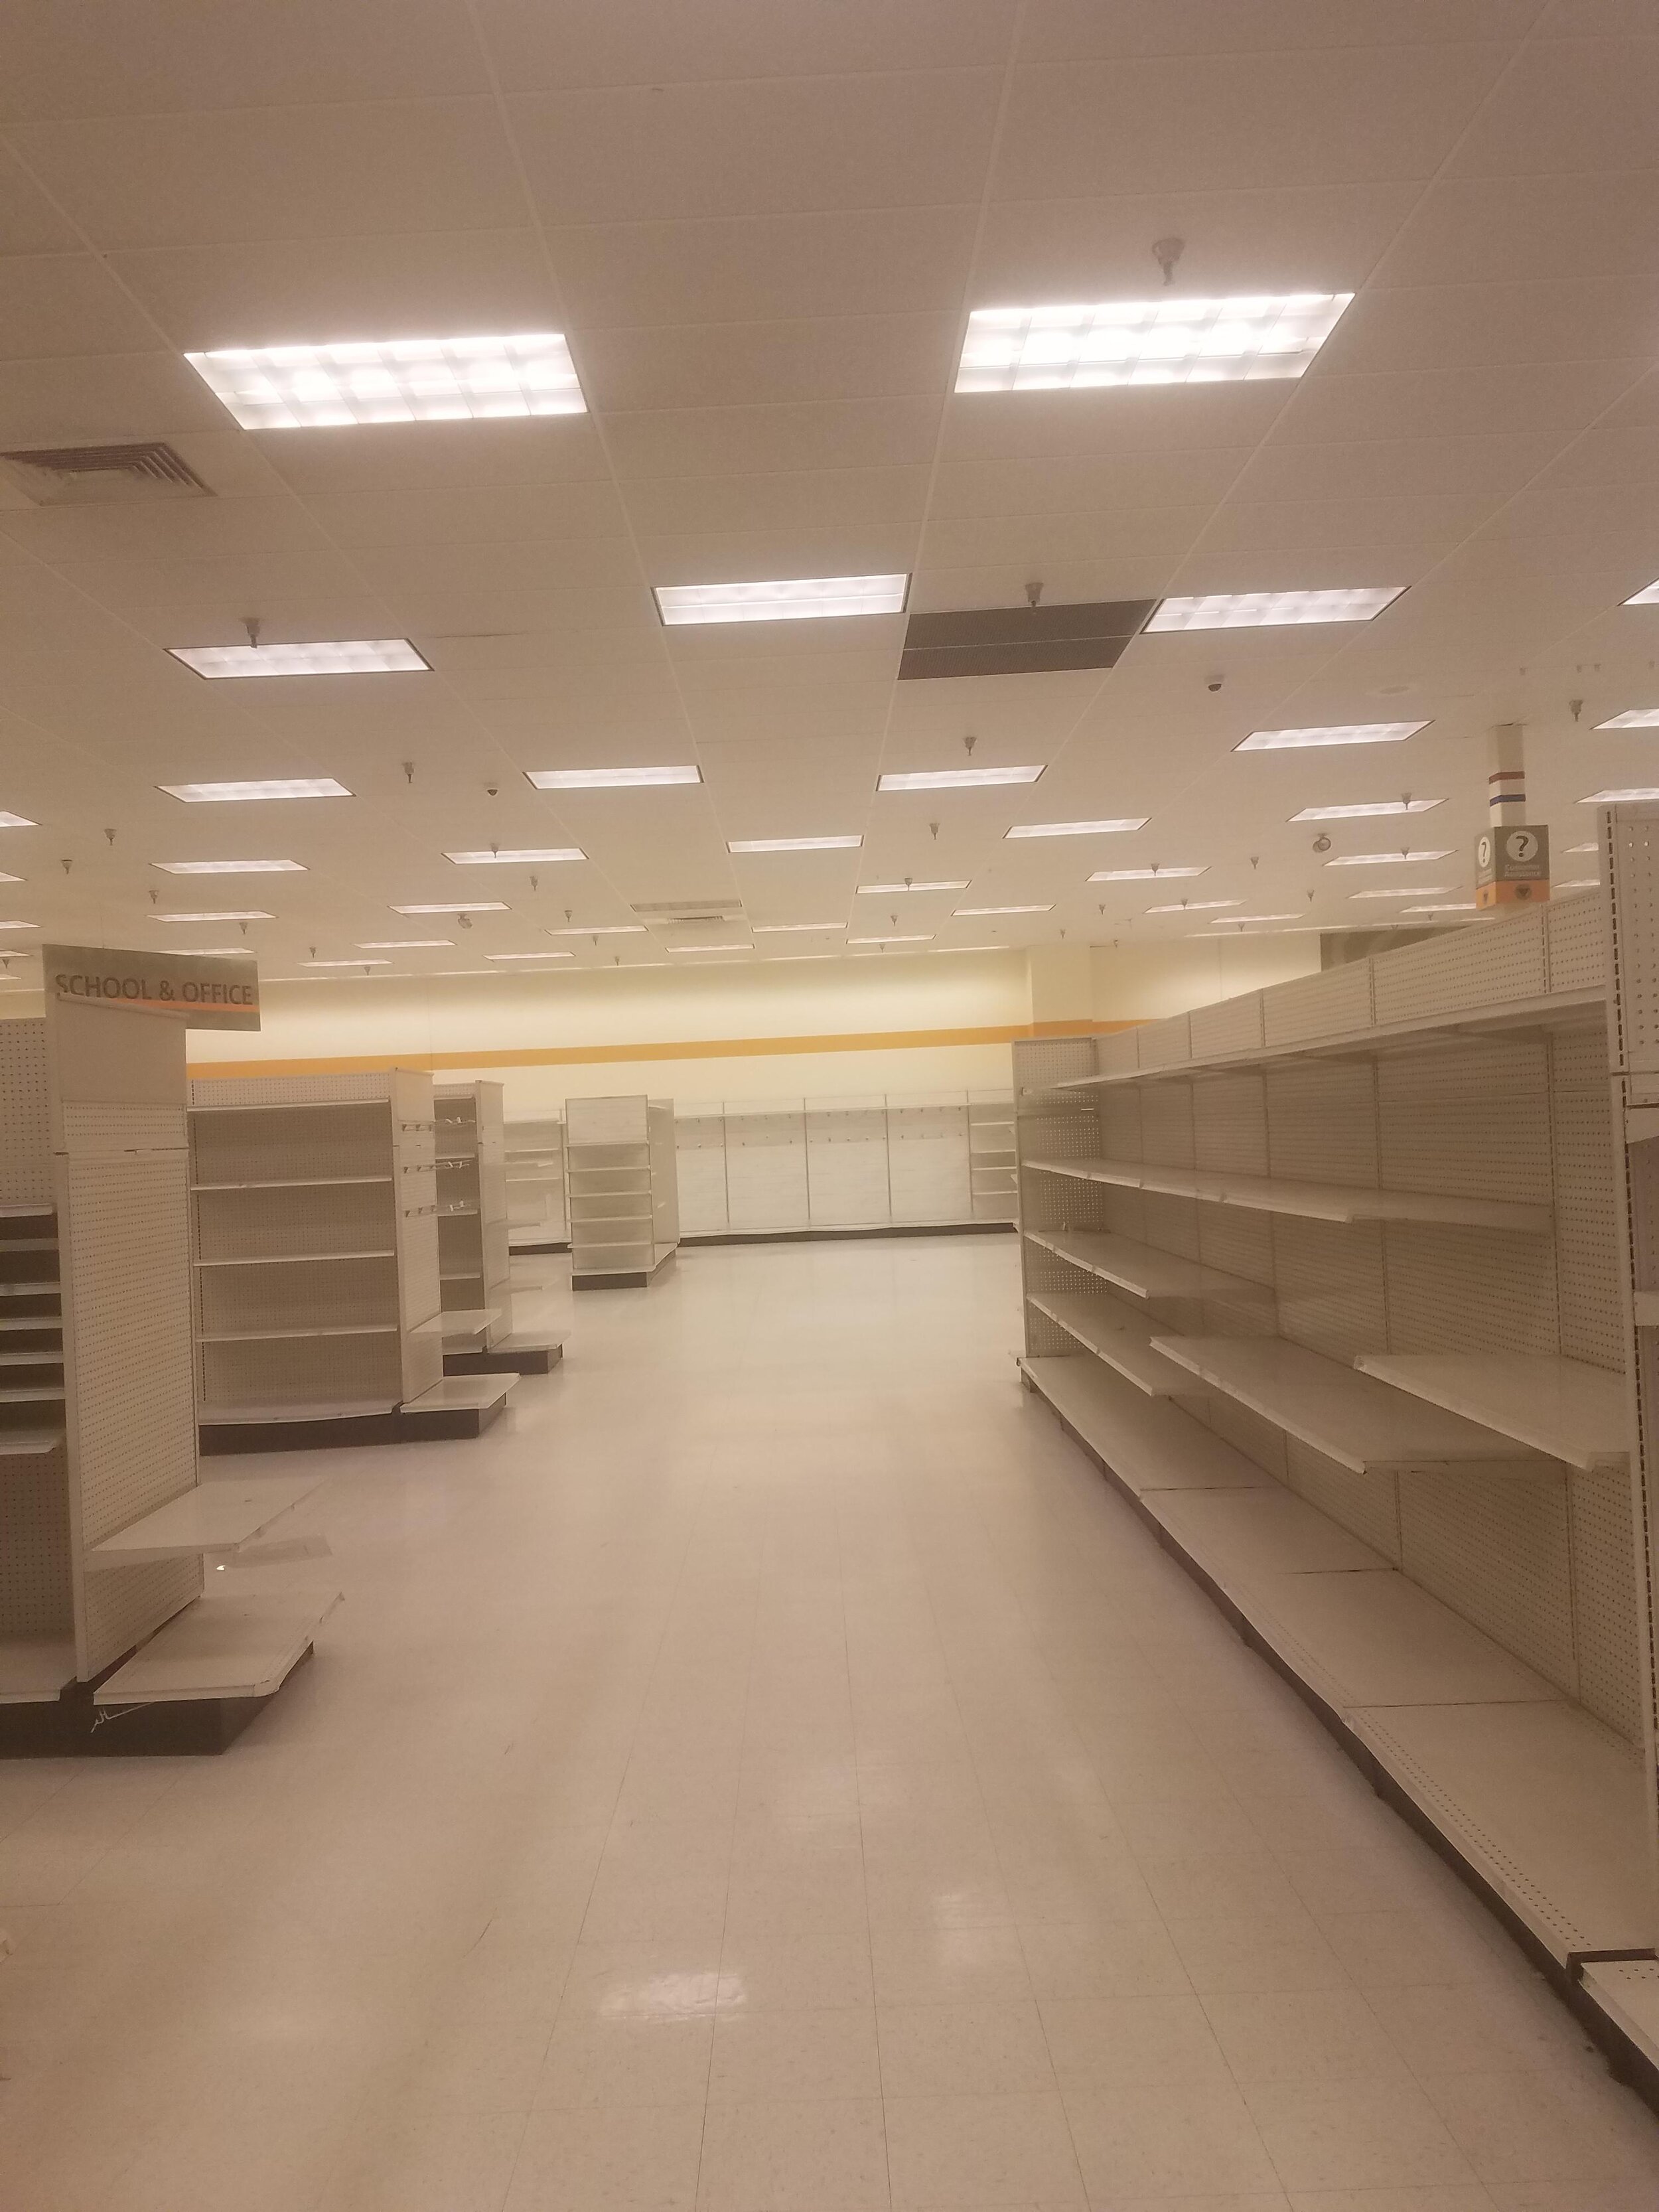 If this was a backrooms level, what would it be called? : r/backrooms